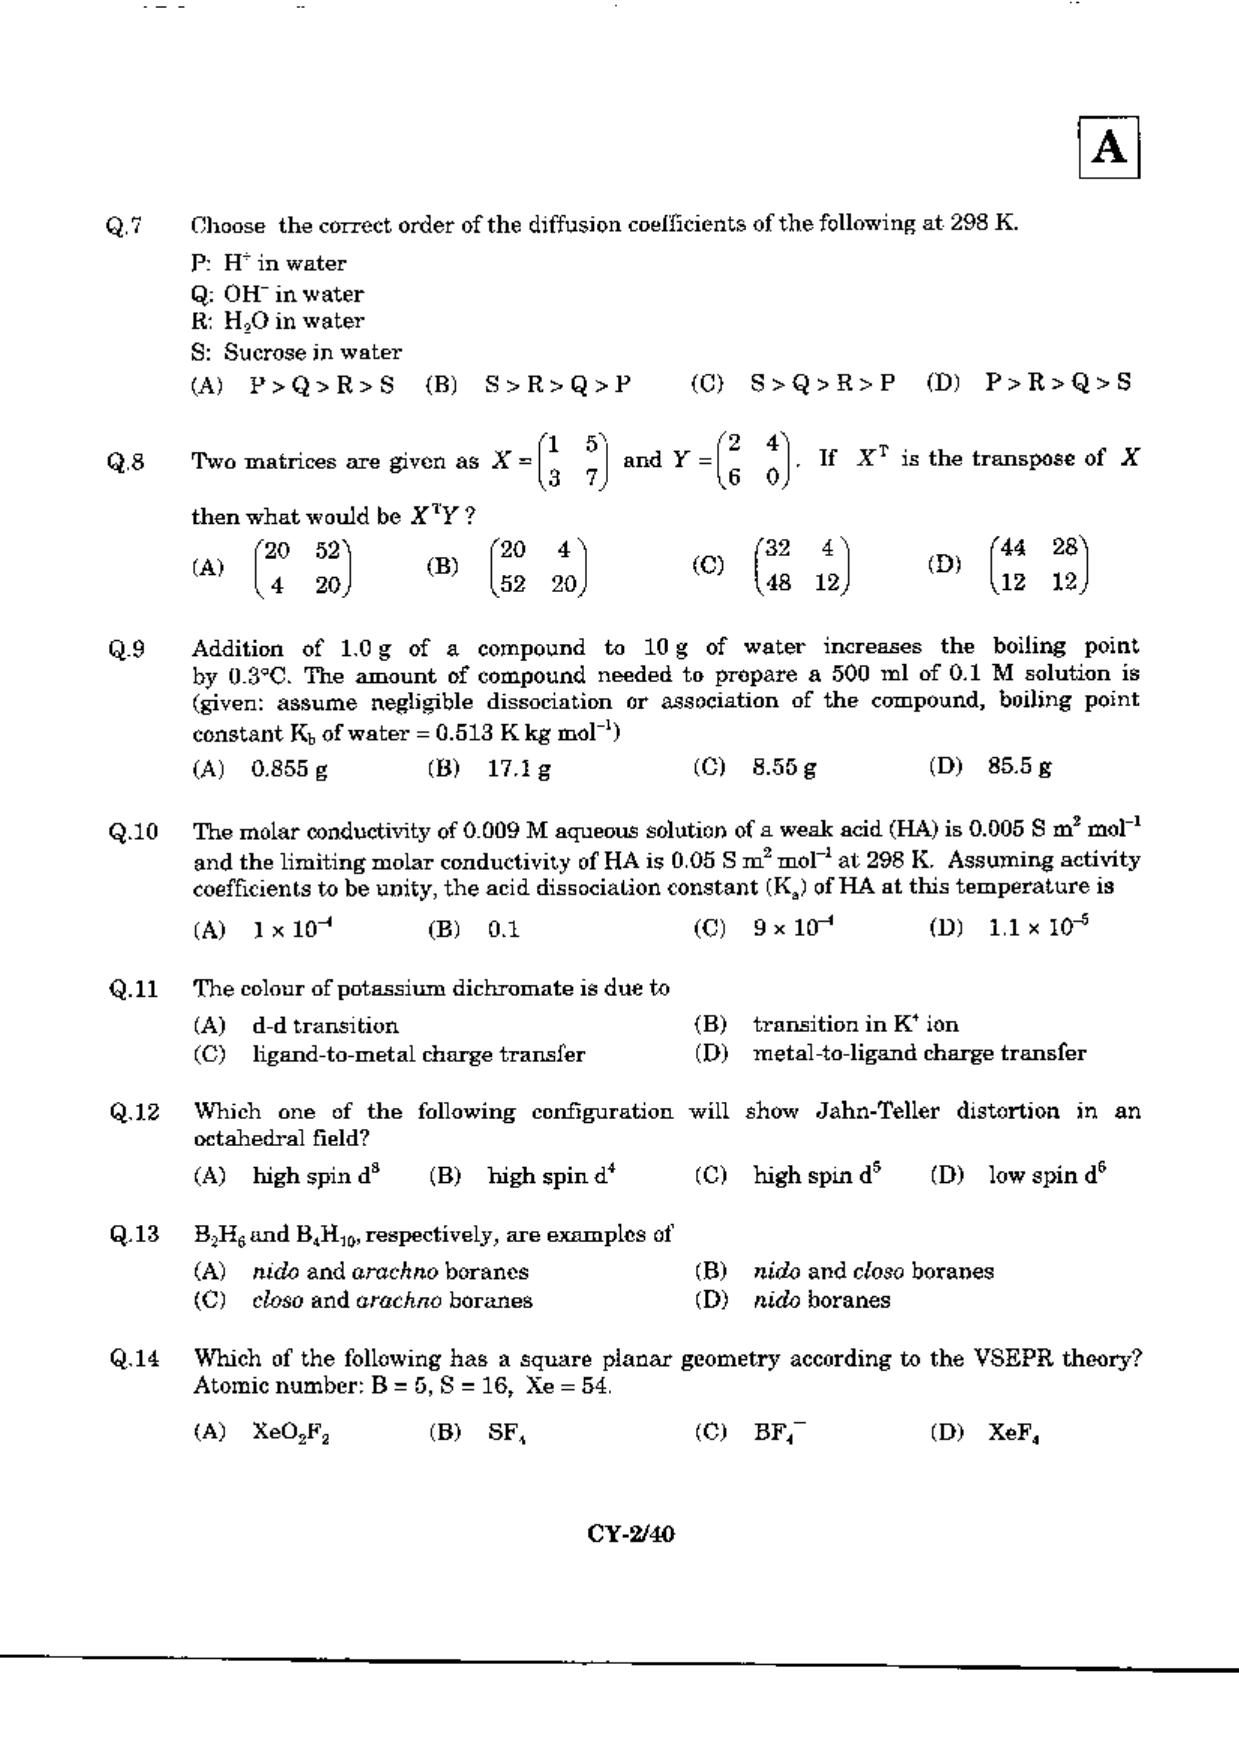 JAM 2010: CY Question Paper - Page 4